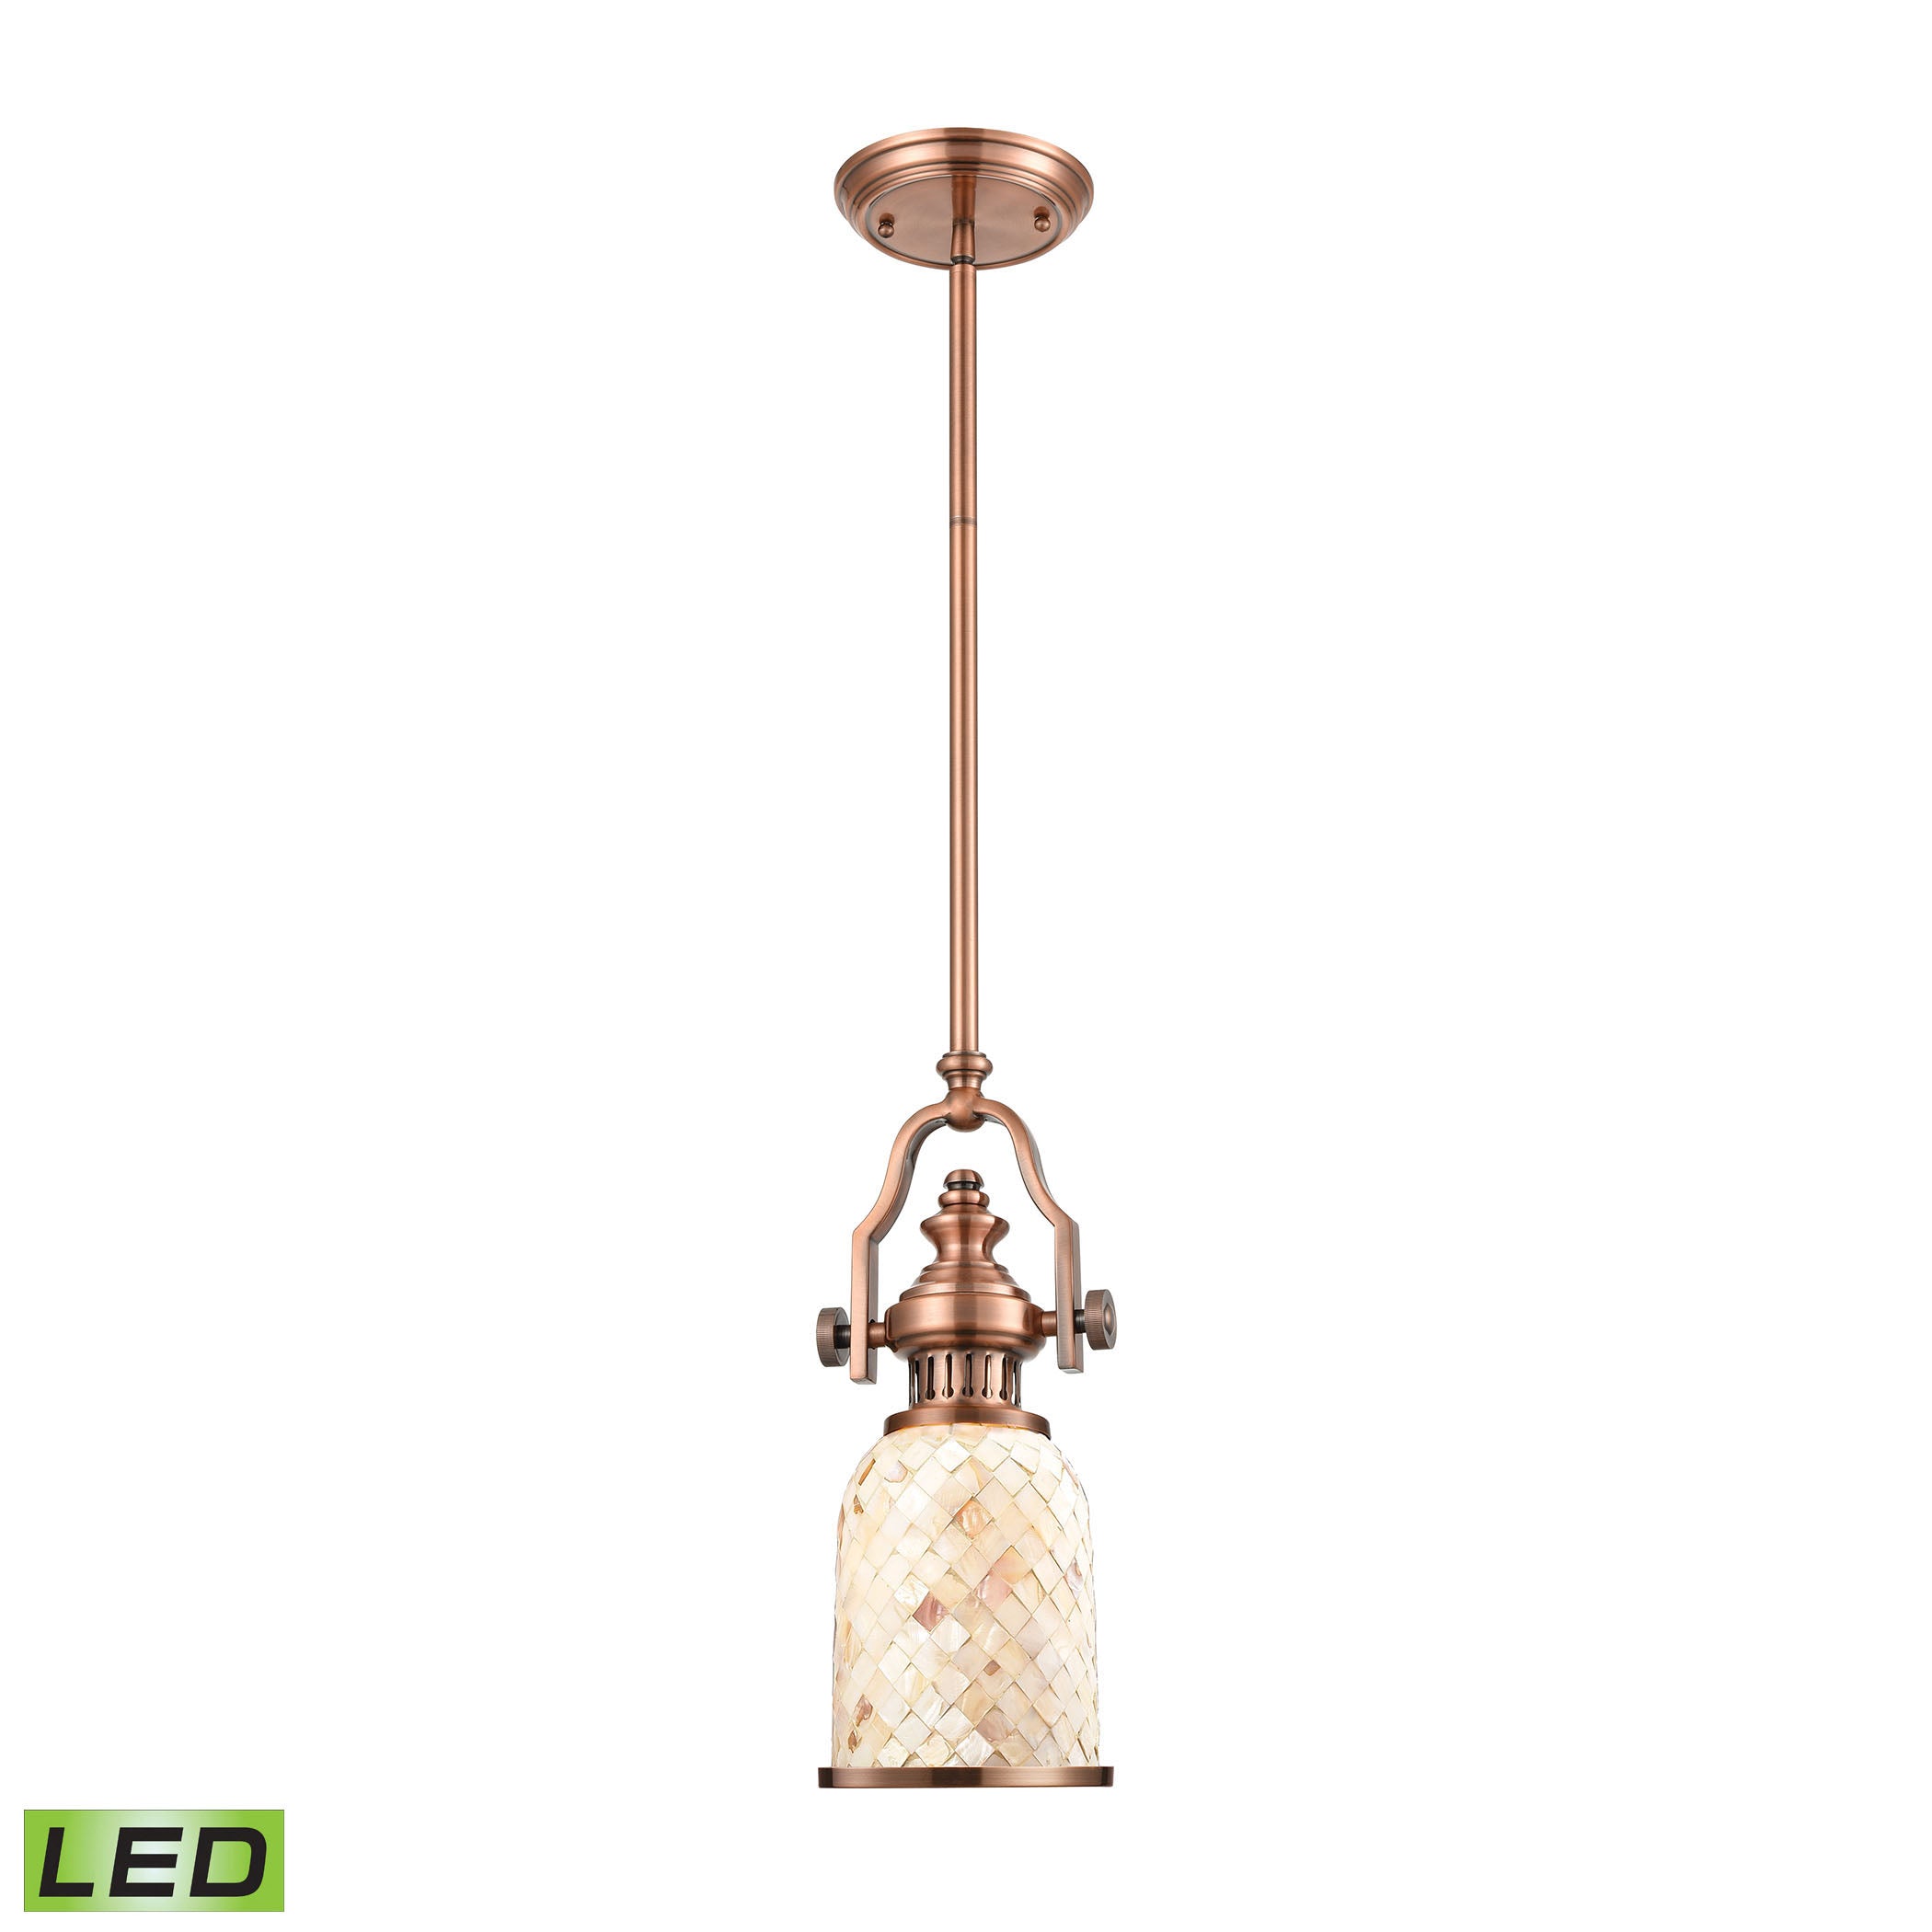 ELK Lighting 66442-1-LED Chadwick 1-Light Mini Pendant in Antique Copper with Cappa Shell Shade - Includes LED Bulb